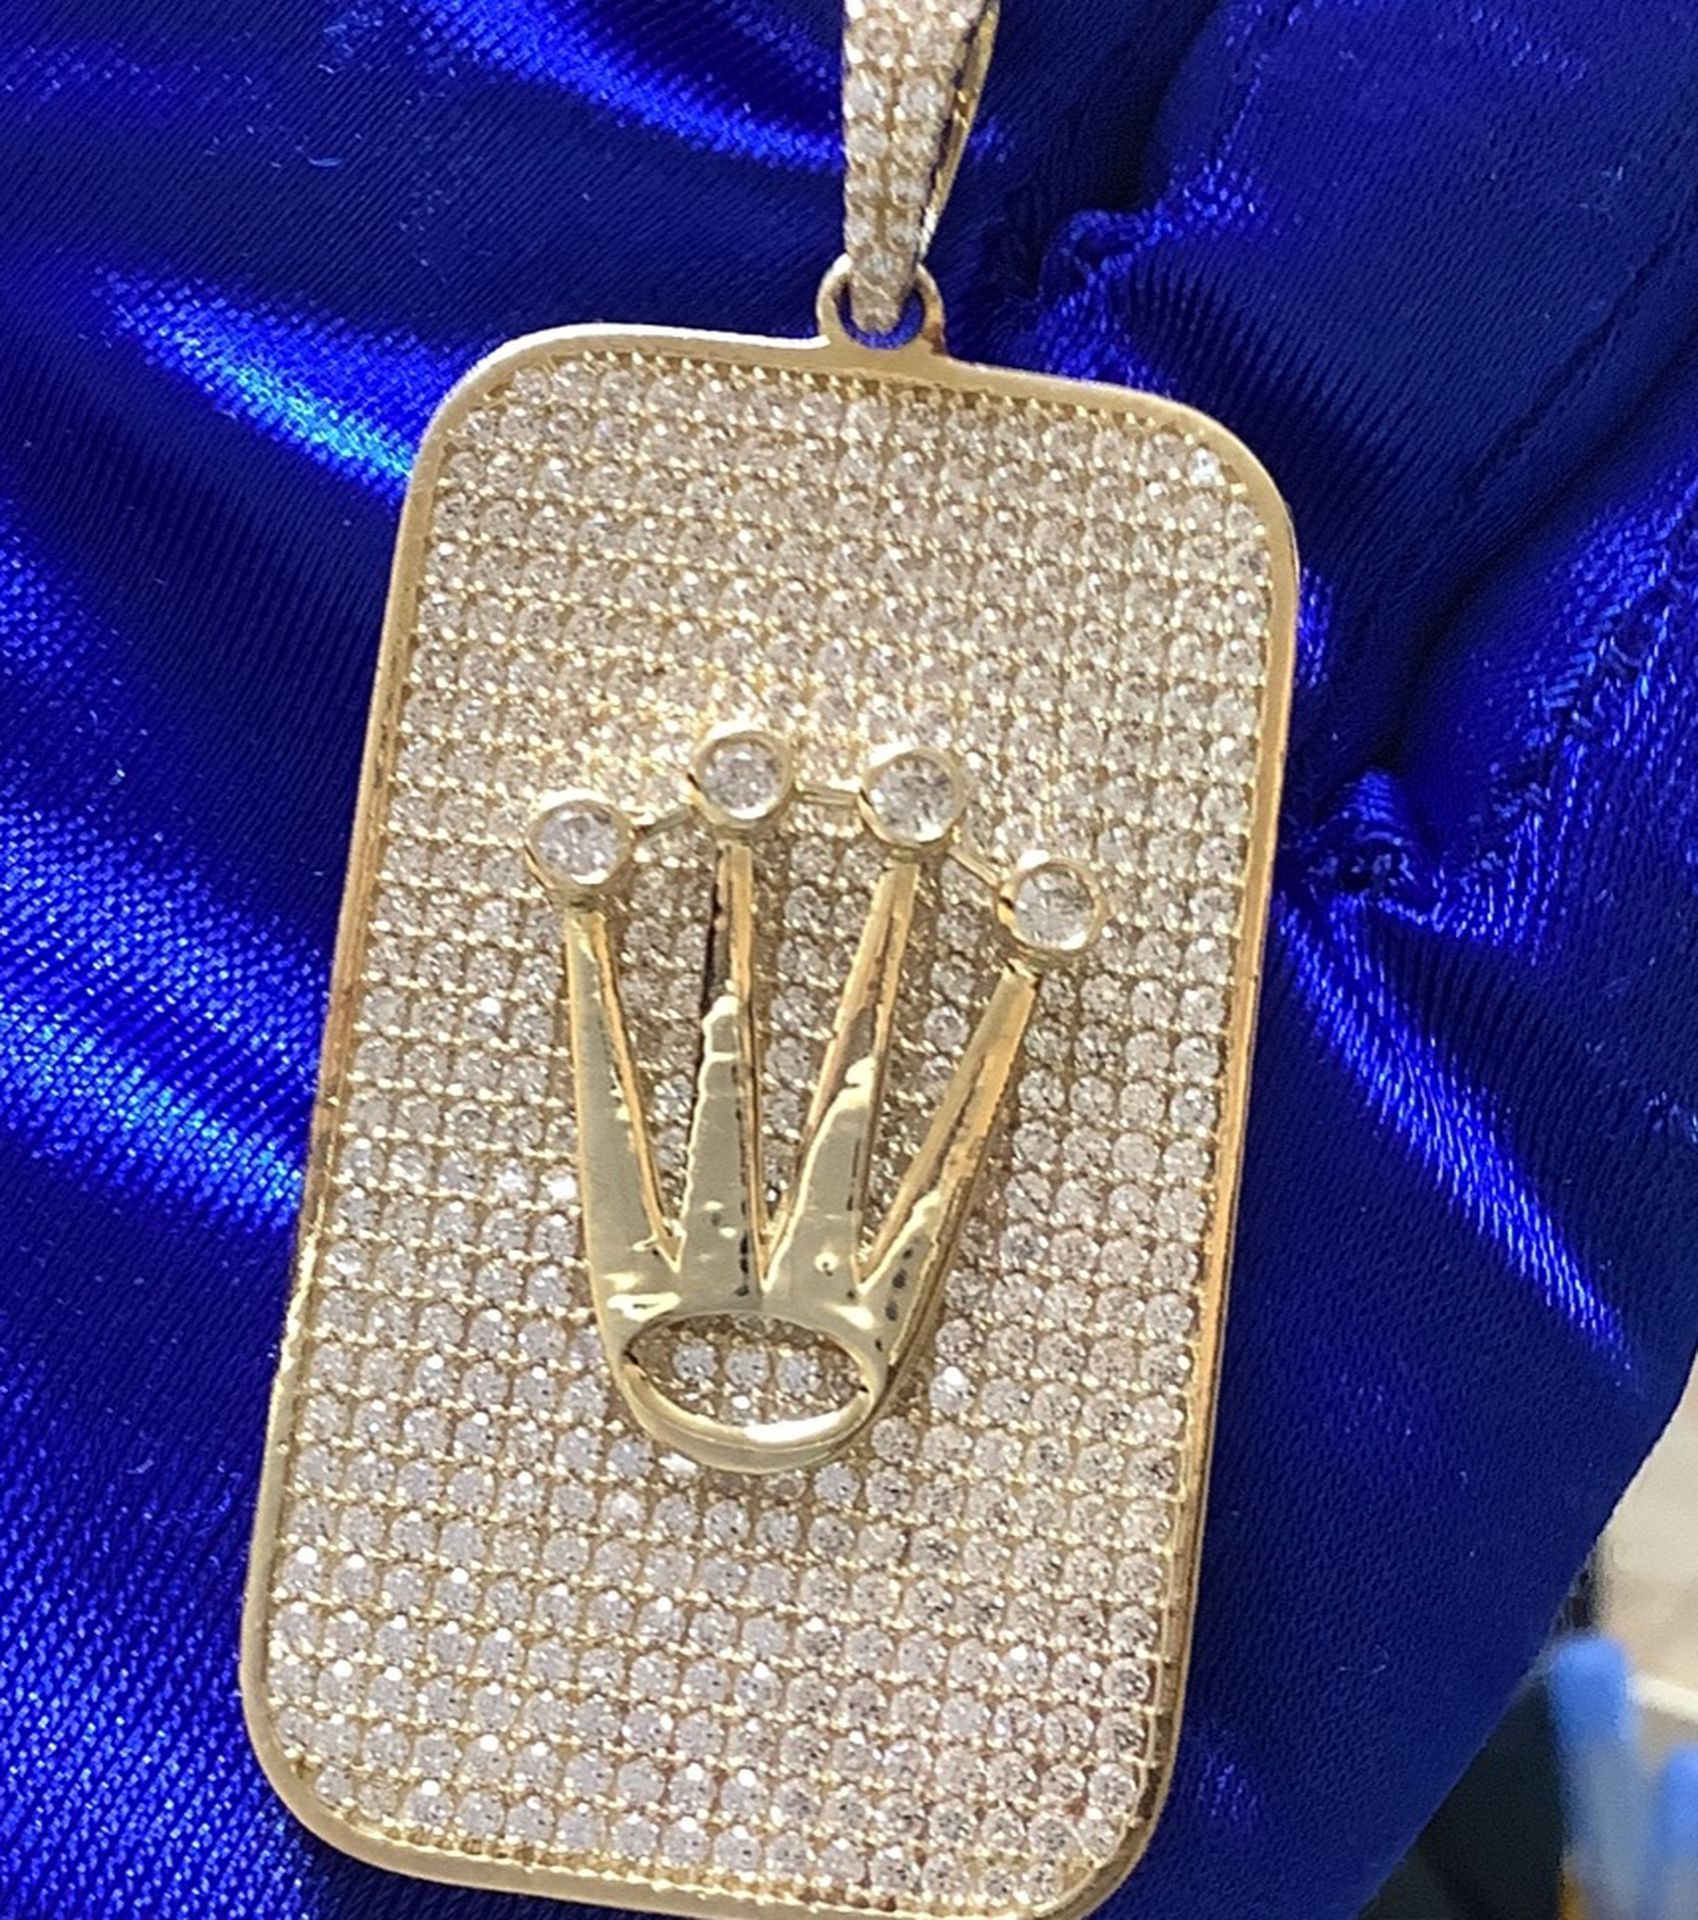 10k Yellow Gold Pendant W/Crystals $959